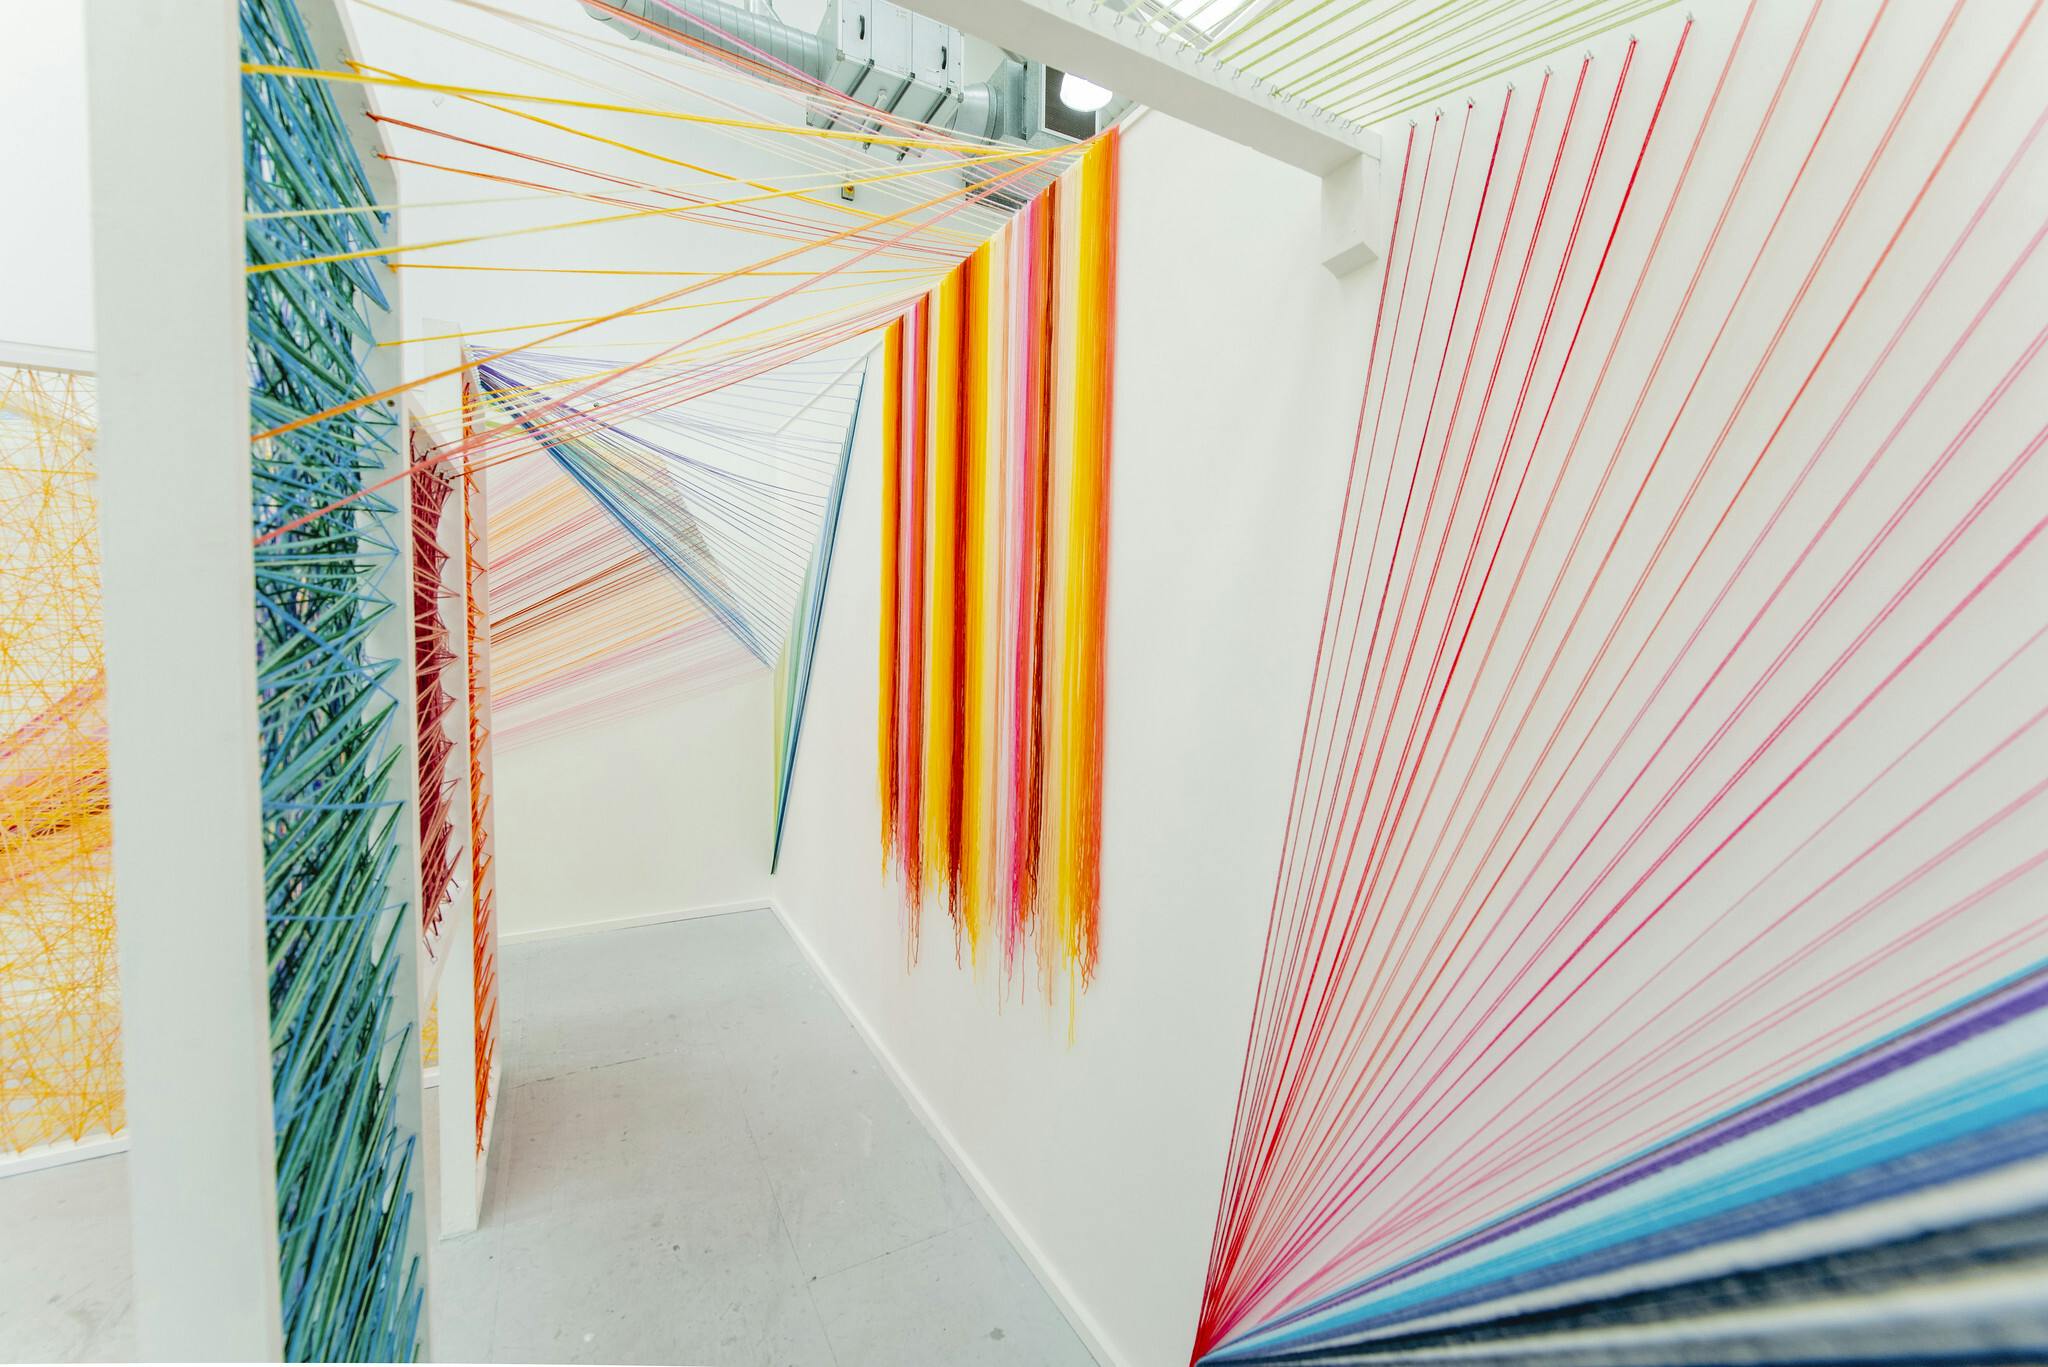 Plymouth College of Art Fine Art installation by Megan Caladwaldr using coloured wool stretched over frames and walls